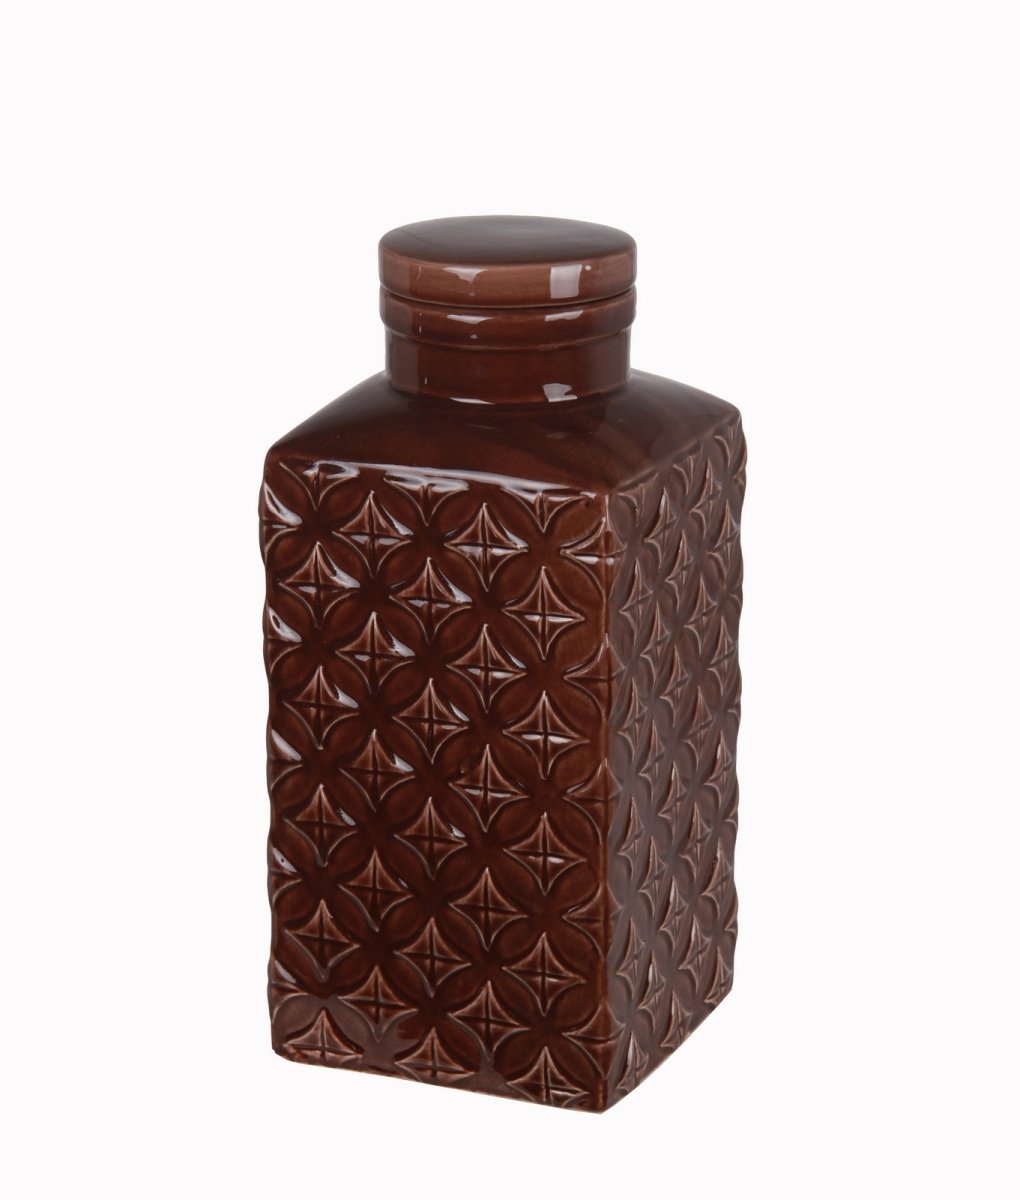 84109 7 X 7 X 15.5 In. Ceramic Jar With Lid, Large